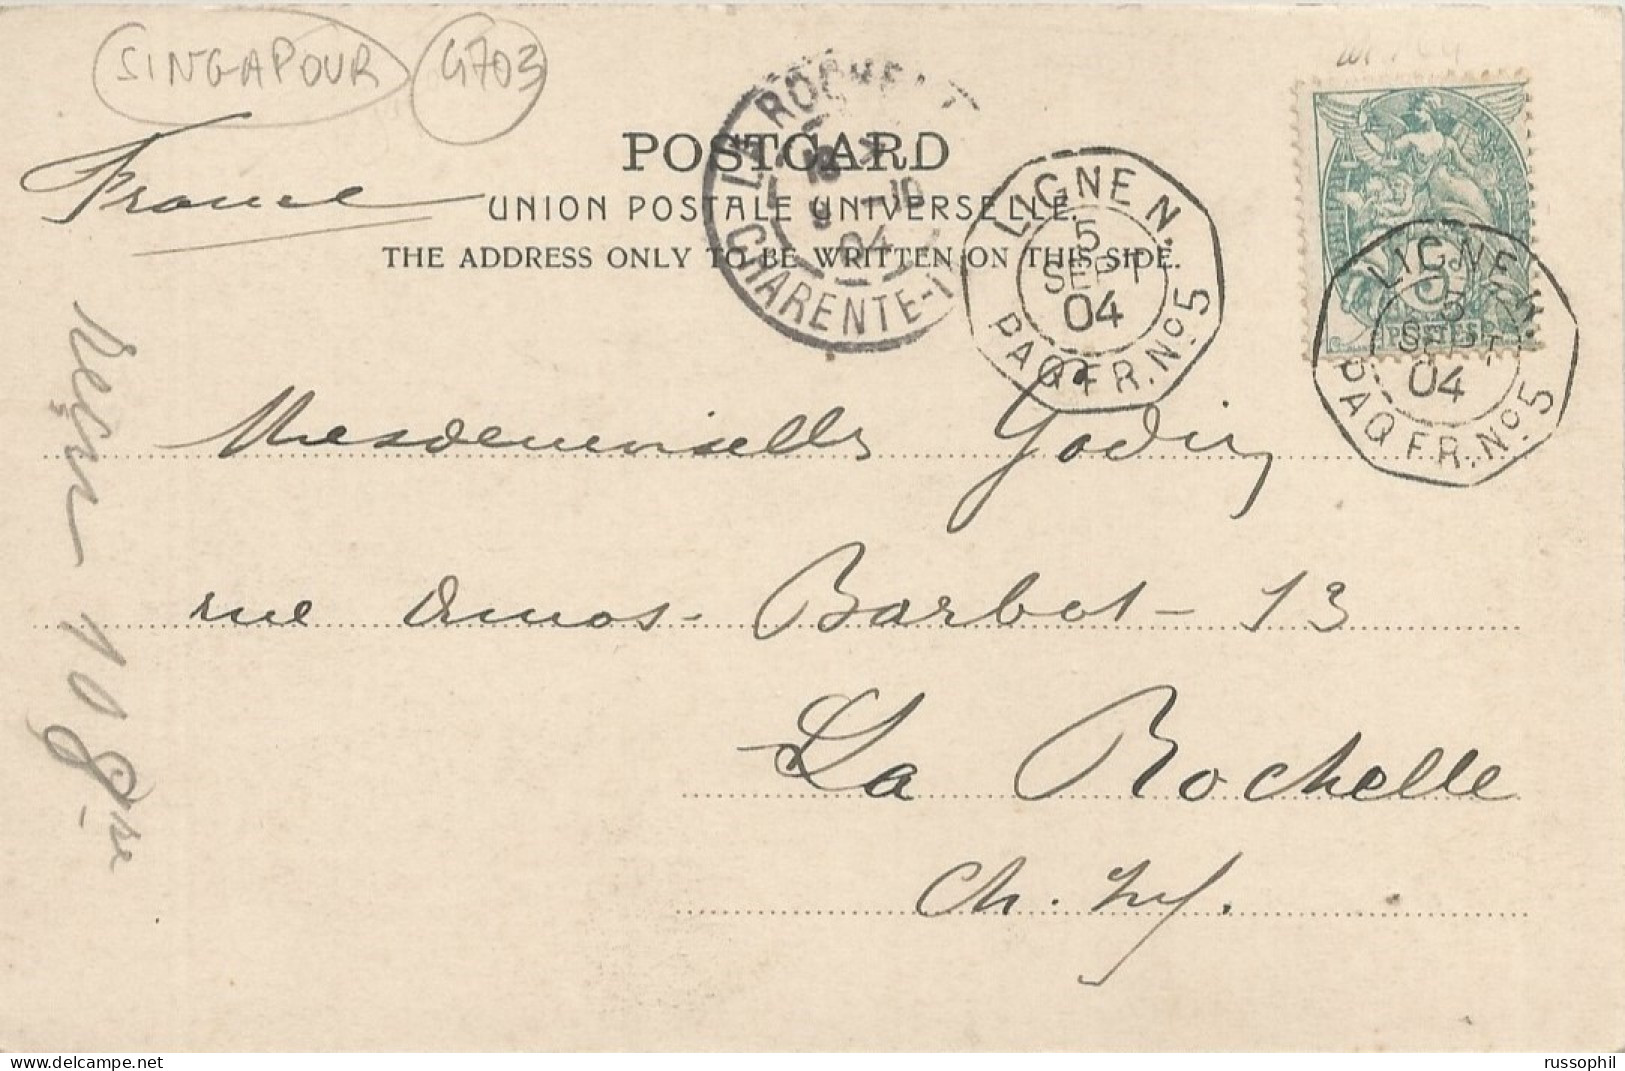 FRANCE - SEA POST- "LIGNE N" DEPARTURE PMK ON FRANKED PC (VIEW OF SINGAPORE) TO FRANCE - 1904 - Maritime Post